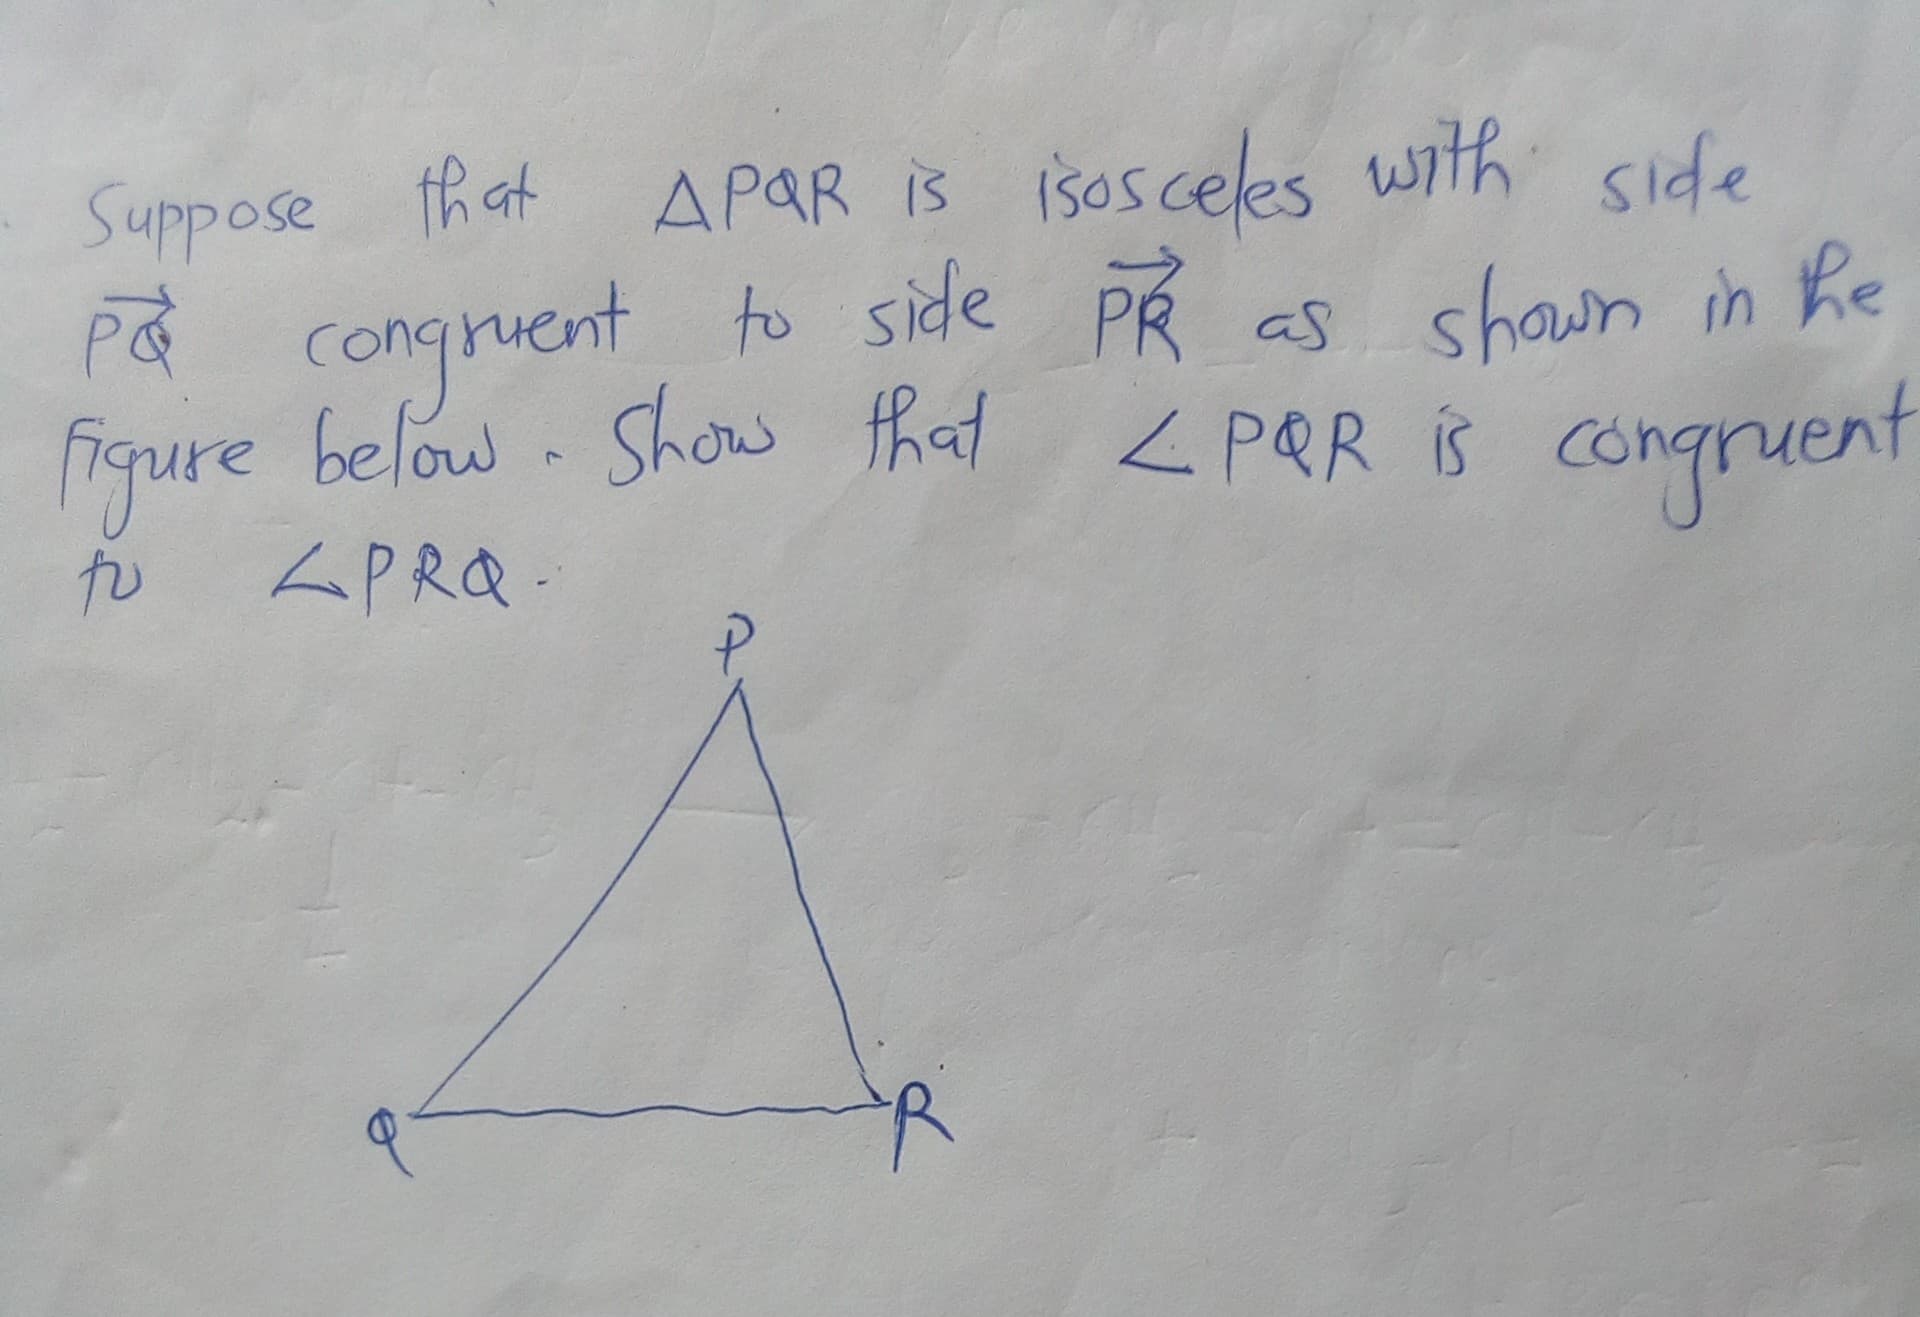 Suppose APAR is iSoscees with
th at
APAR is isosceles
congruent to side På
fiqure below Shows that < pQR is congruent
as
shown in he
to
<PRQ.
